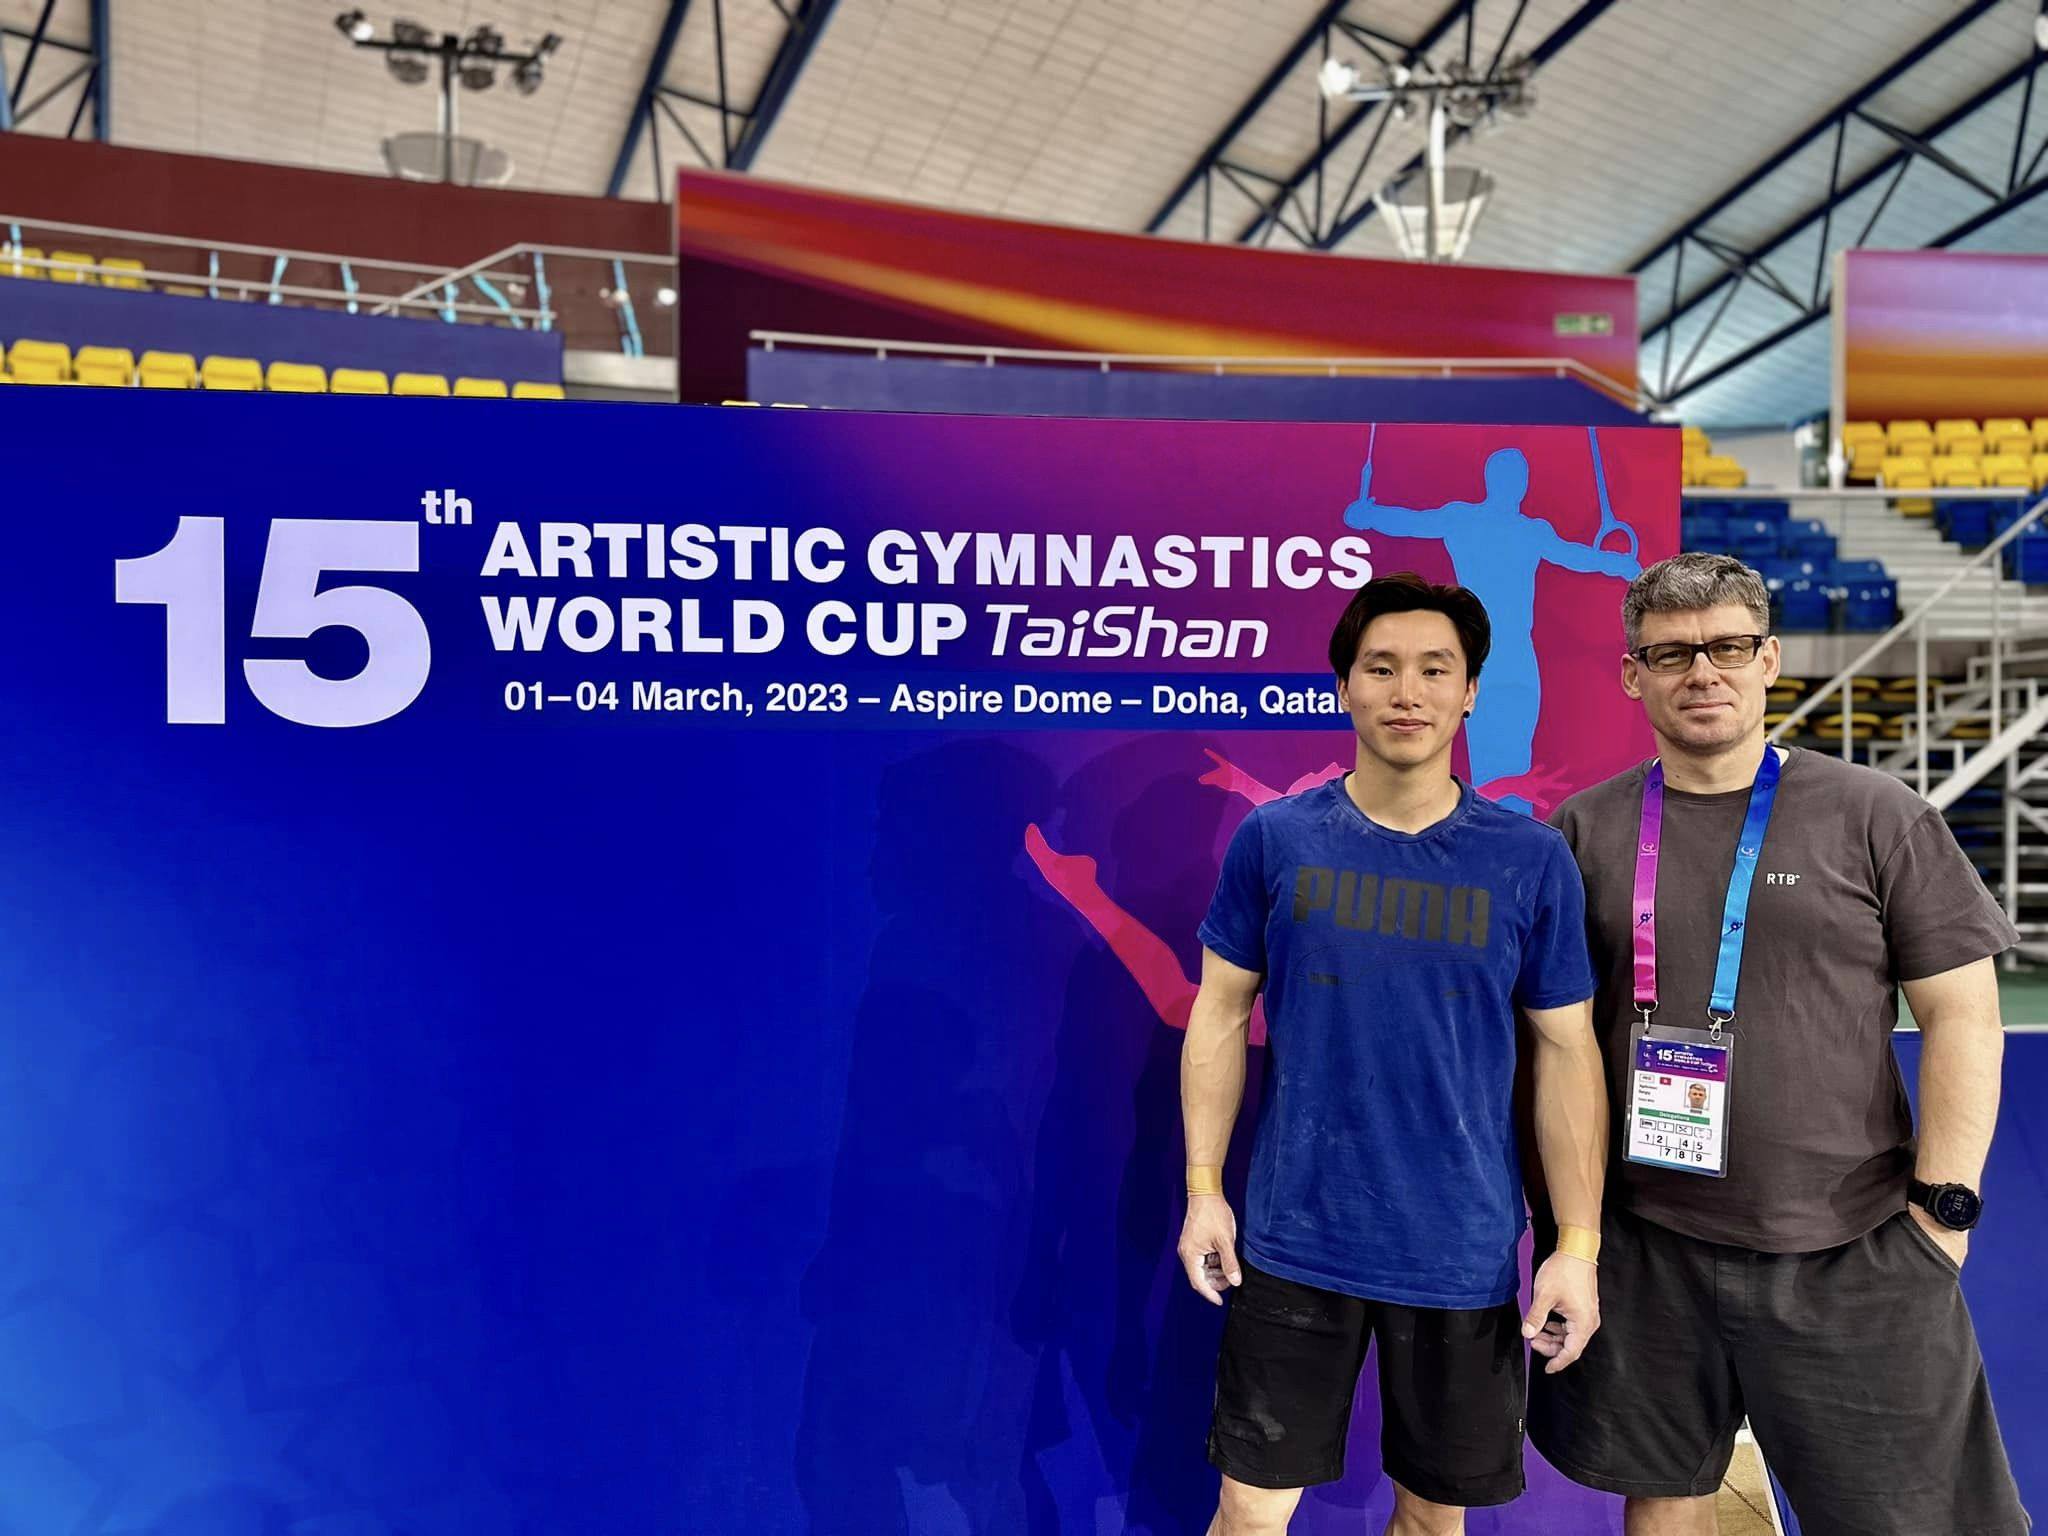 Shek Wai-hung, pictured with coach Sergiy Agafontsev, is ready for the second leg of the World Cup in Doha after a medal in the first. Photo: Handout